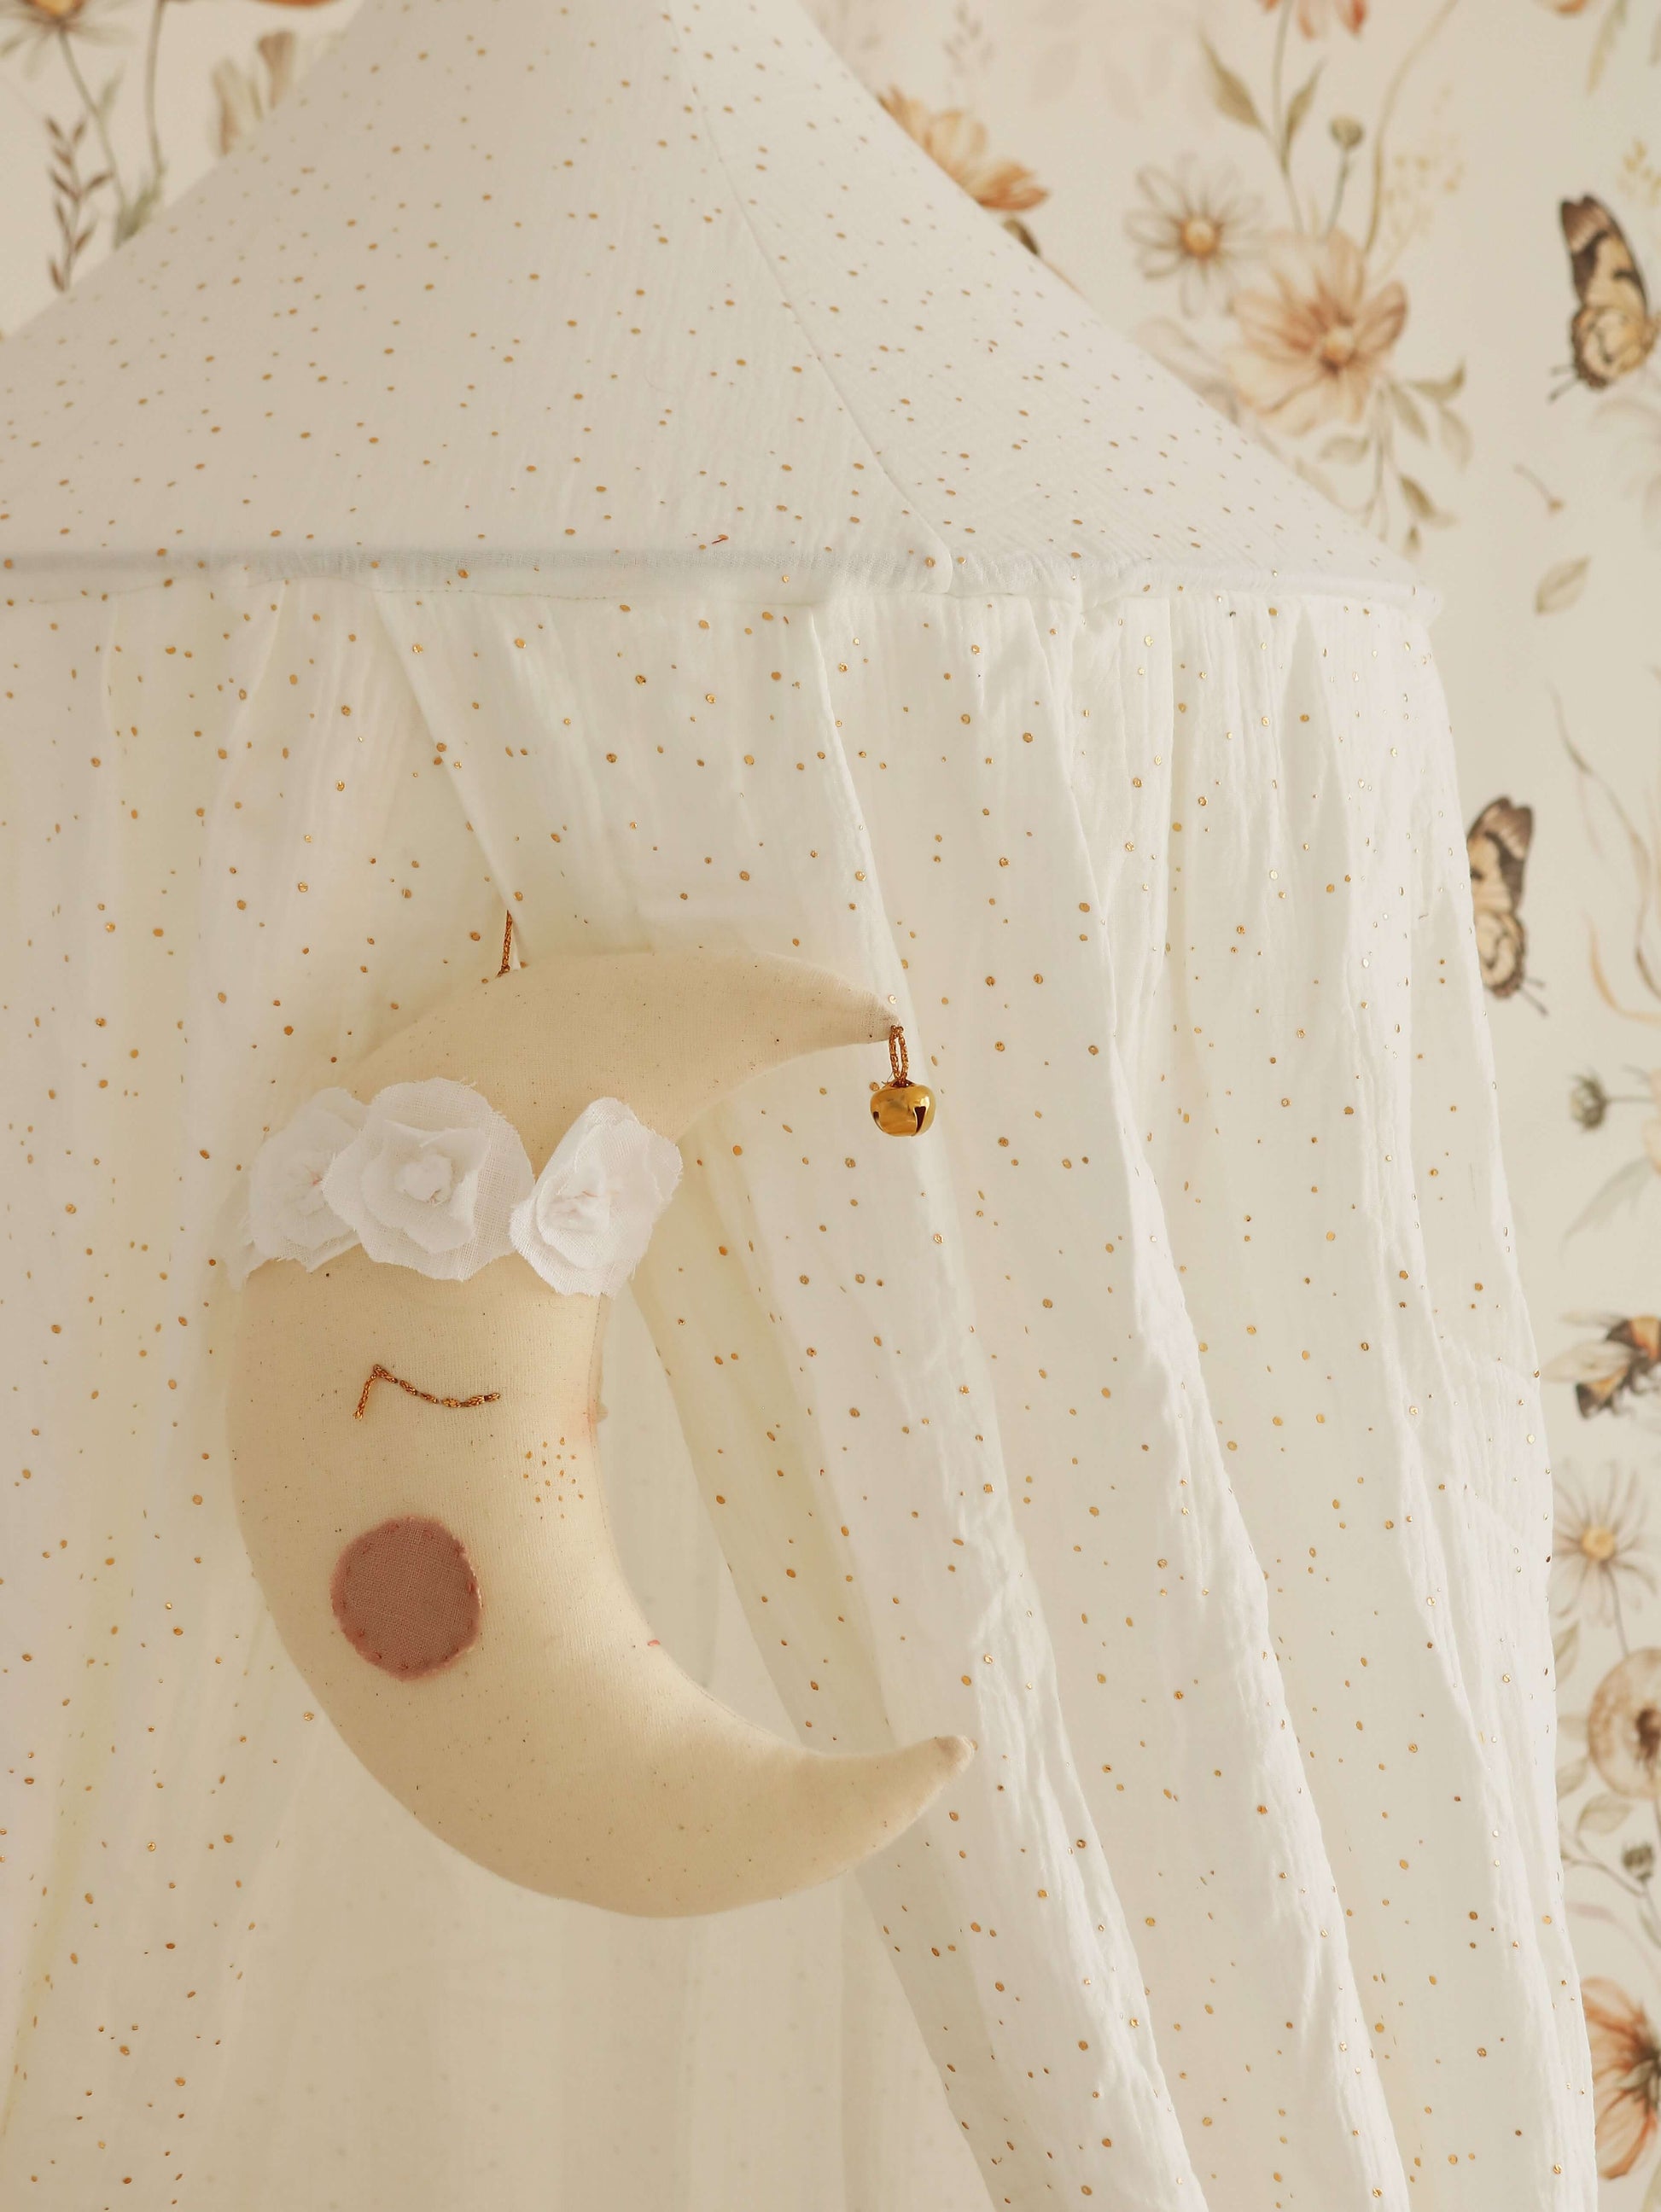 Matuu - Cream with gold dots canopy - bed canopy, bedhemel